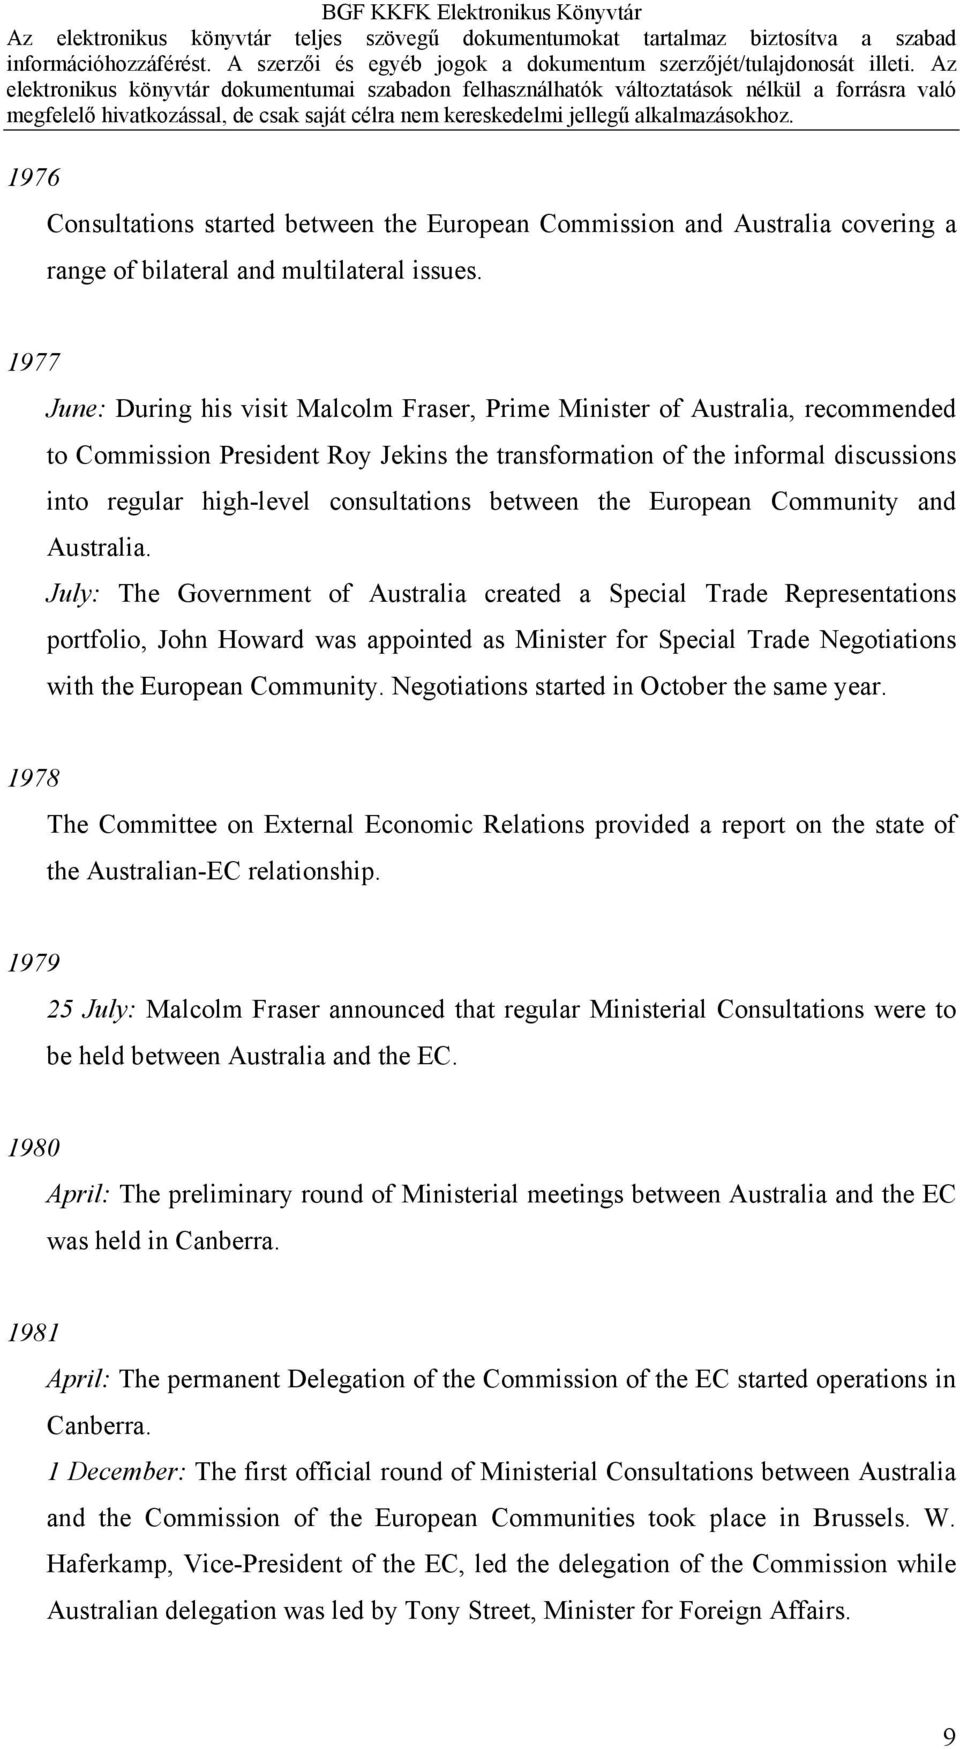 consultations between the European Community and Australia.